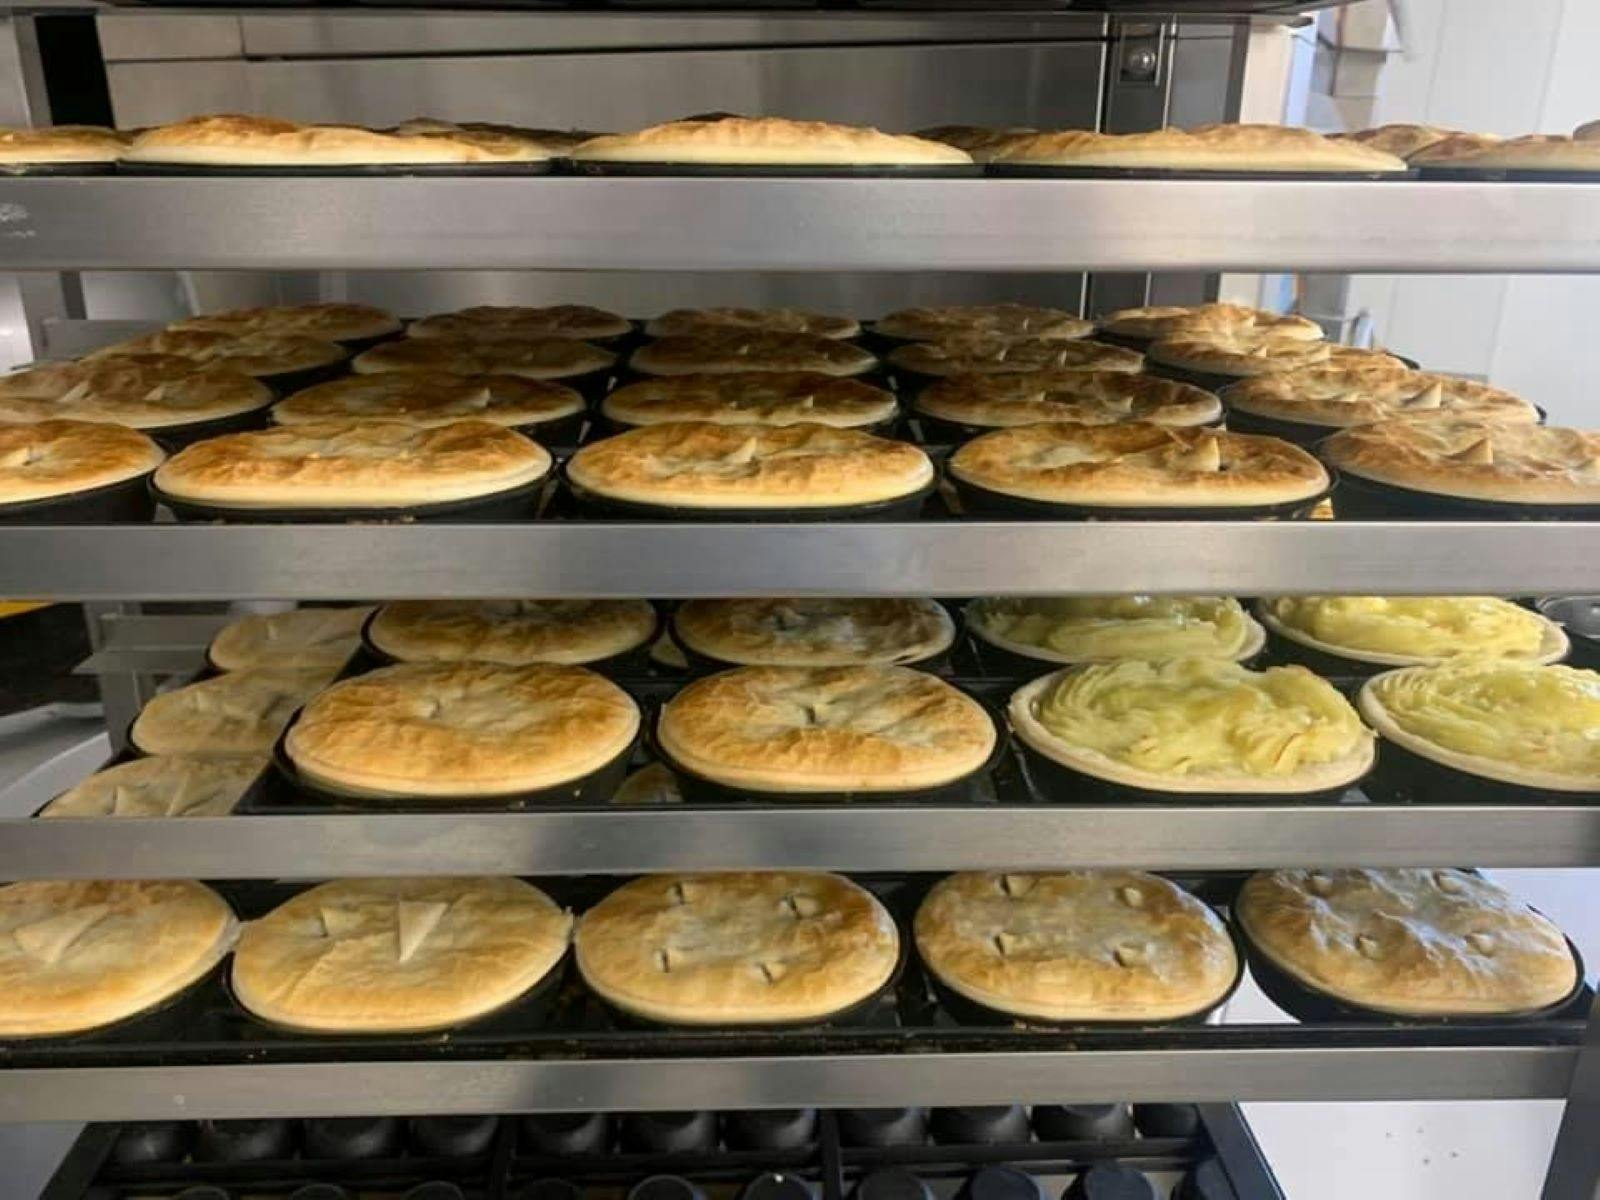 Lots of fresh pies, all different flavours, sitting in rows in a pie warmer.